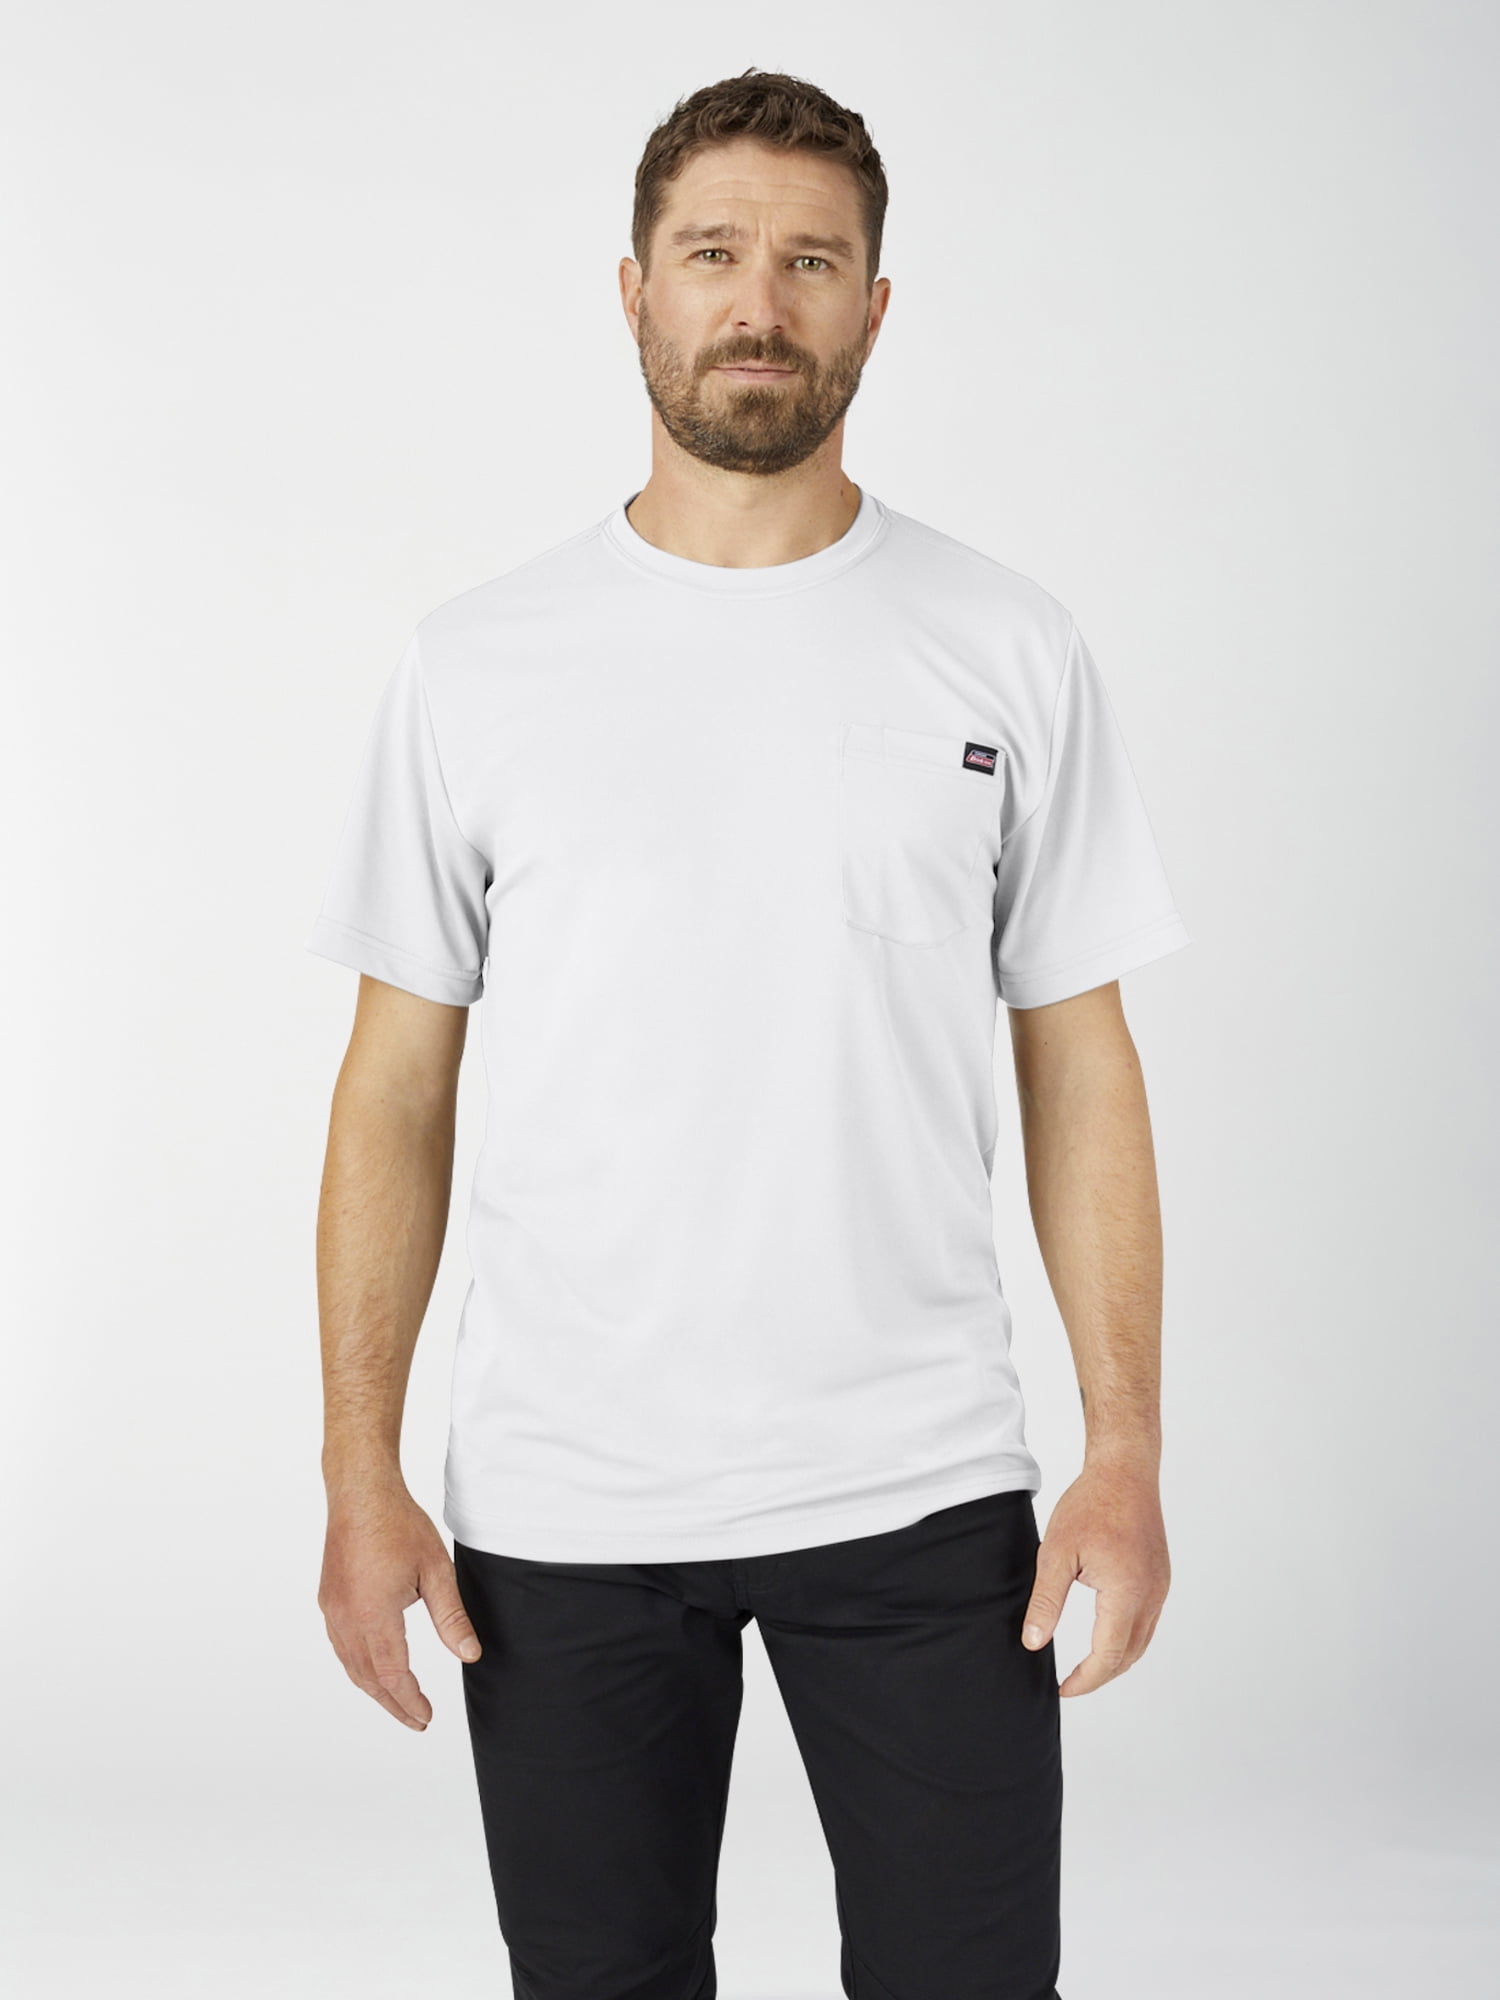 Genuine Dickies Short Sleeve Pullover Crew Neck Relaxed Fit T-Shirt (Men's Big Tall) 1 Pack - Walmart.com